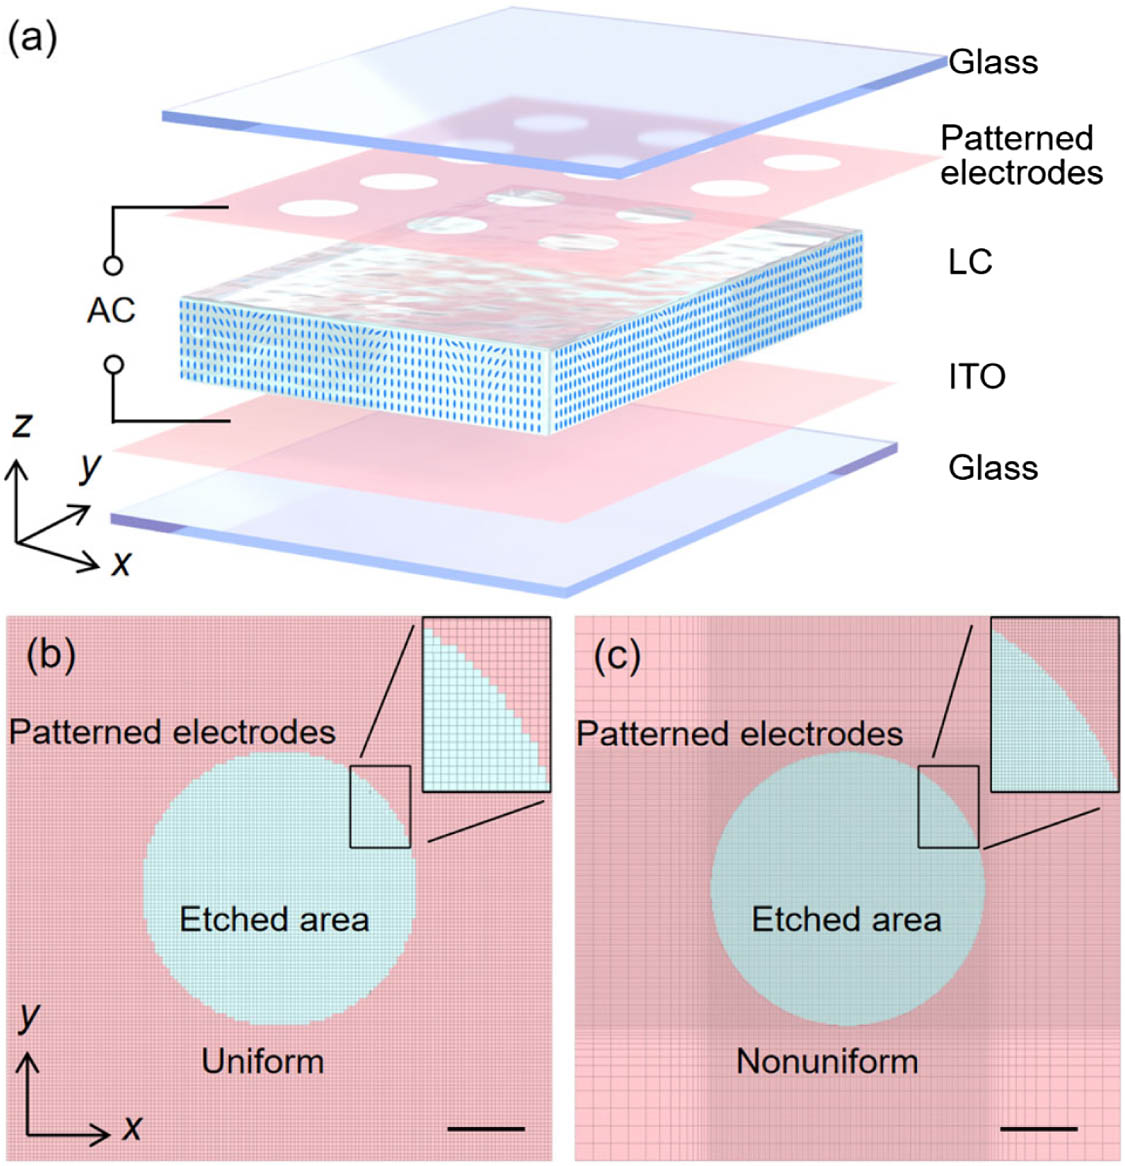 (a) Schematic diagram of electrically stimulated LC photonic device. (b), (c) Grids of patterned electrode meshing in similar number of model grids. (b) Uniform grids and (c) nonuniform grids. The scale bars in (b), (c) are 10 μm.